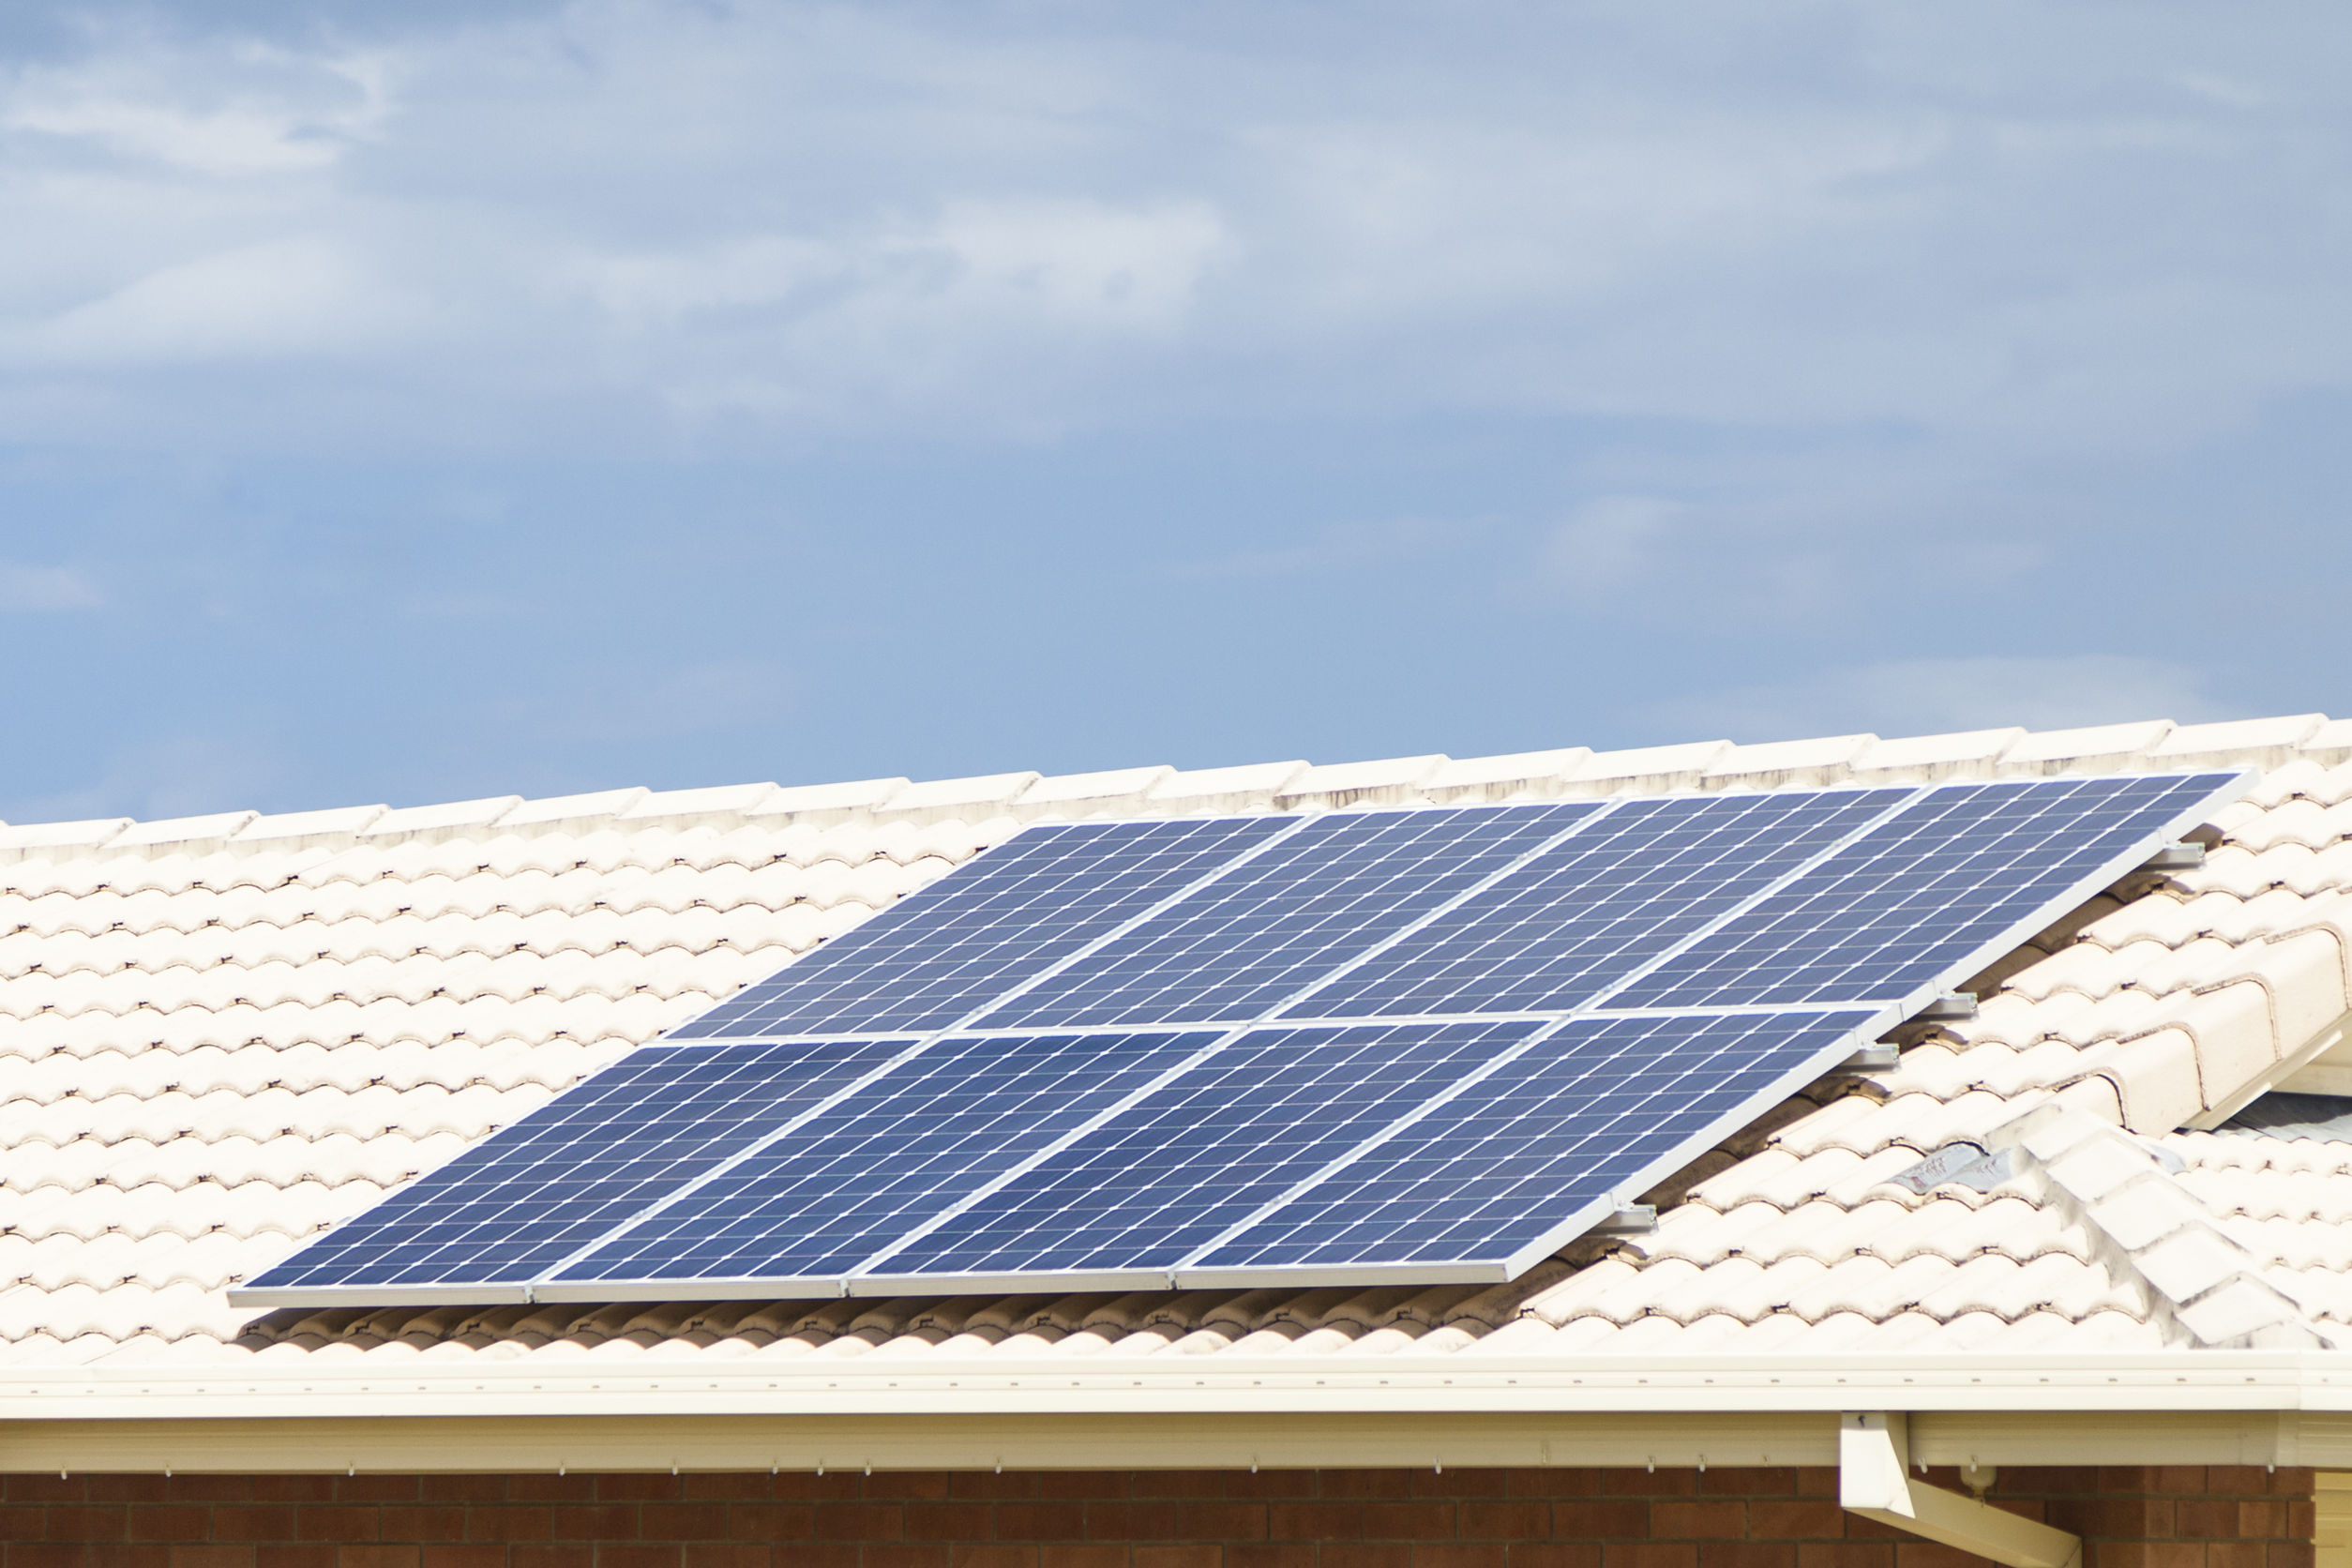 Solar Panel Installation Is the Next Big Thing